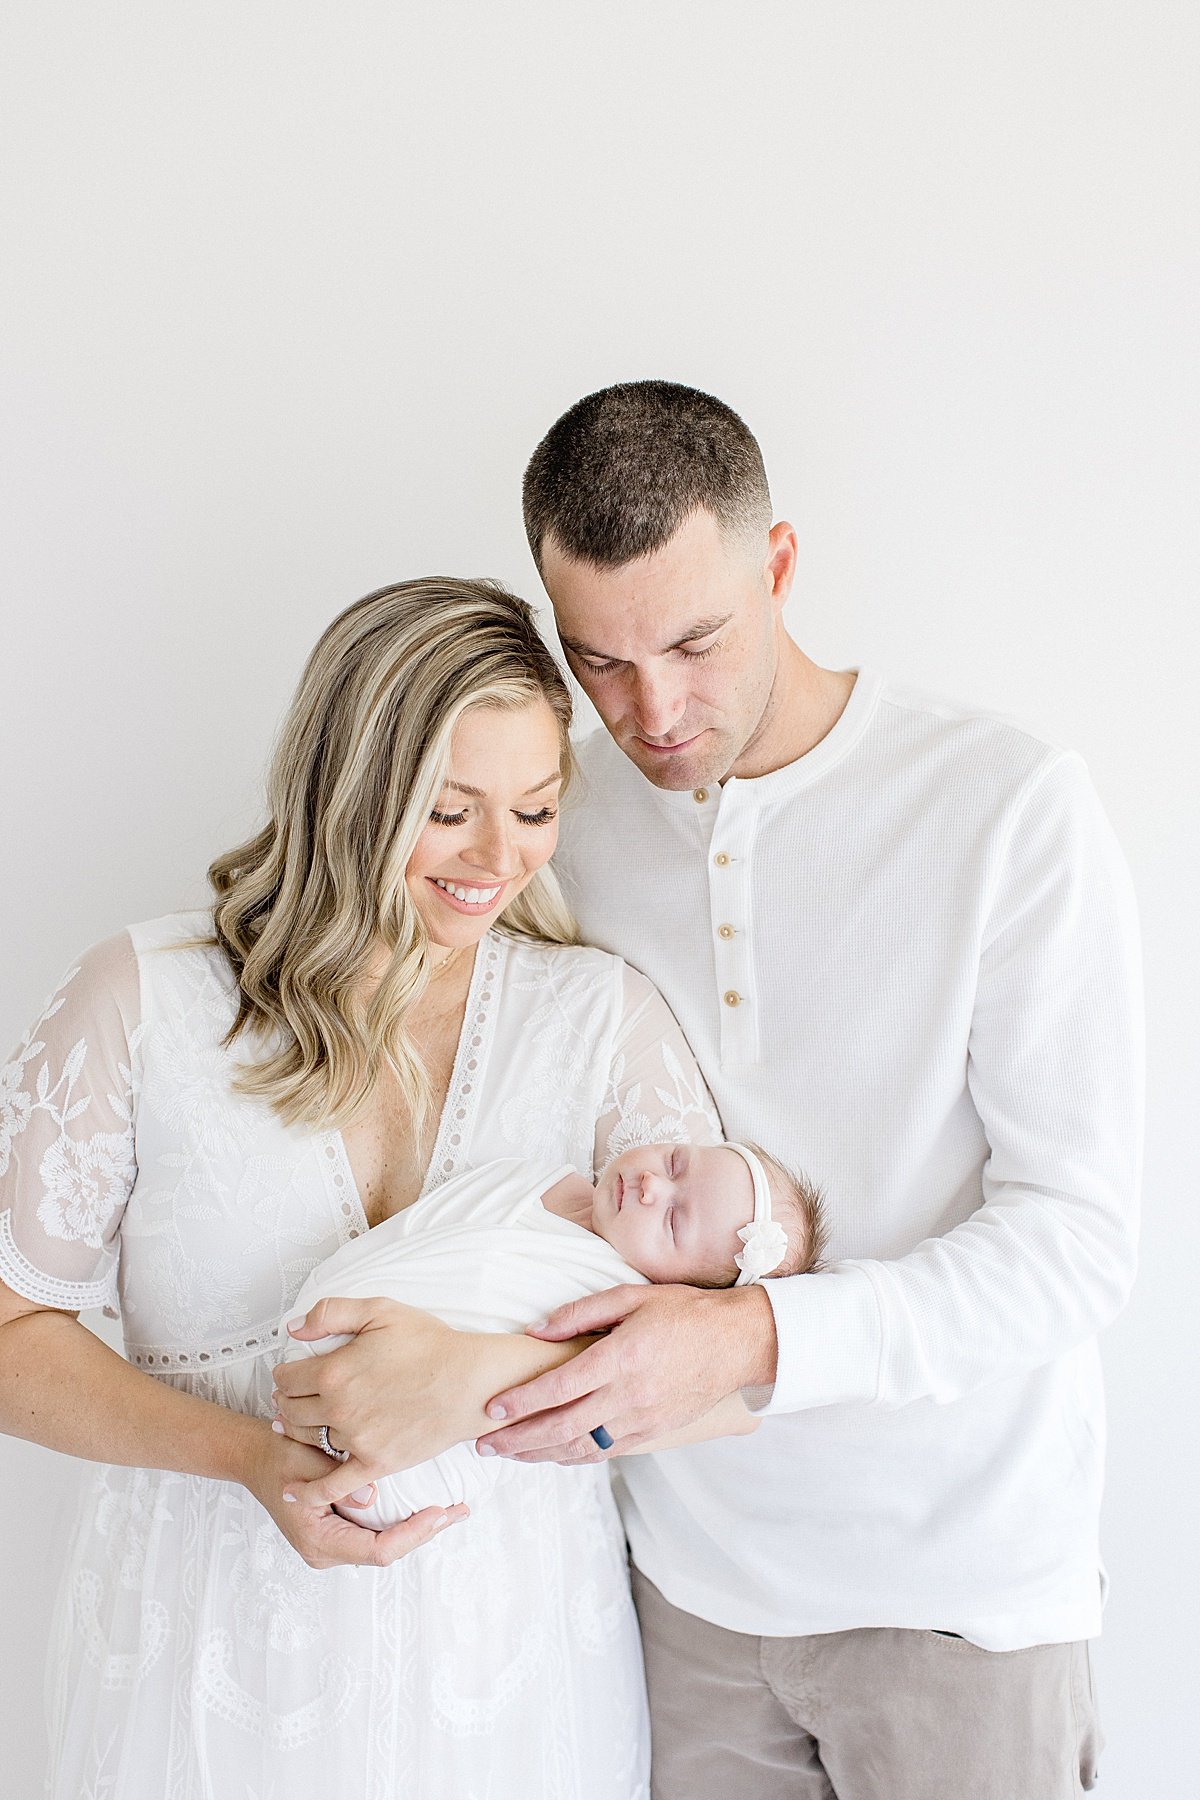 Newport Beach Photographer Ambre WIlliams photographs mom, dad, and newborn baby girl during portrait session in studio